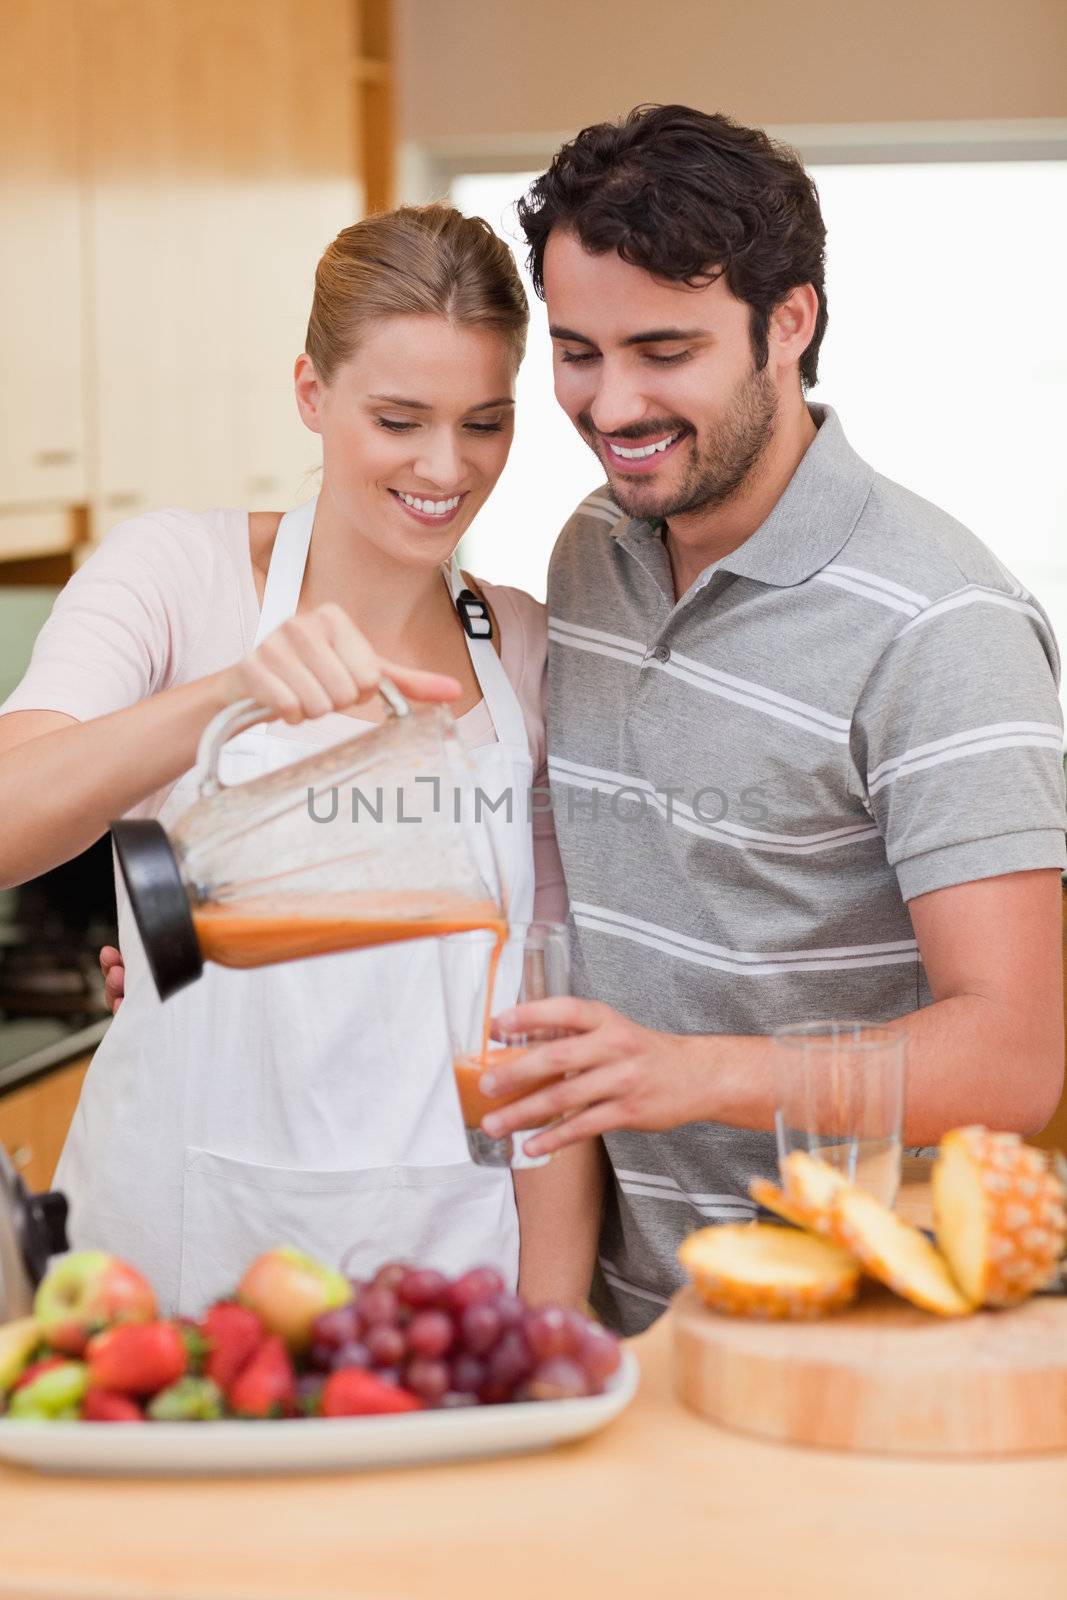 Portrait of a young couple drinking fruits juice in their kitchen